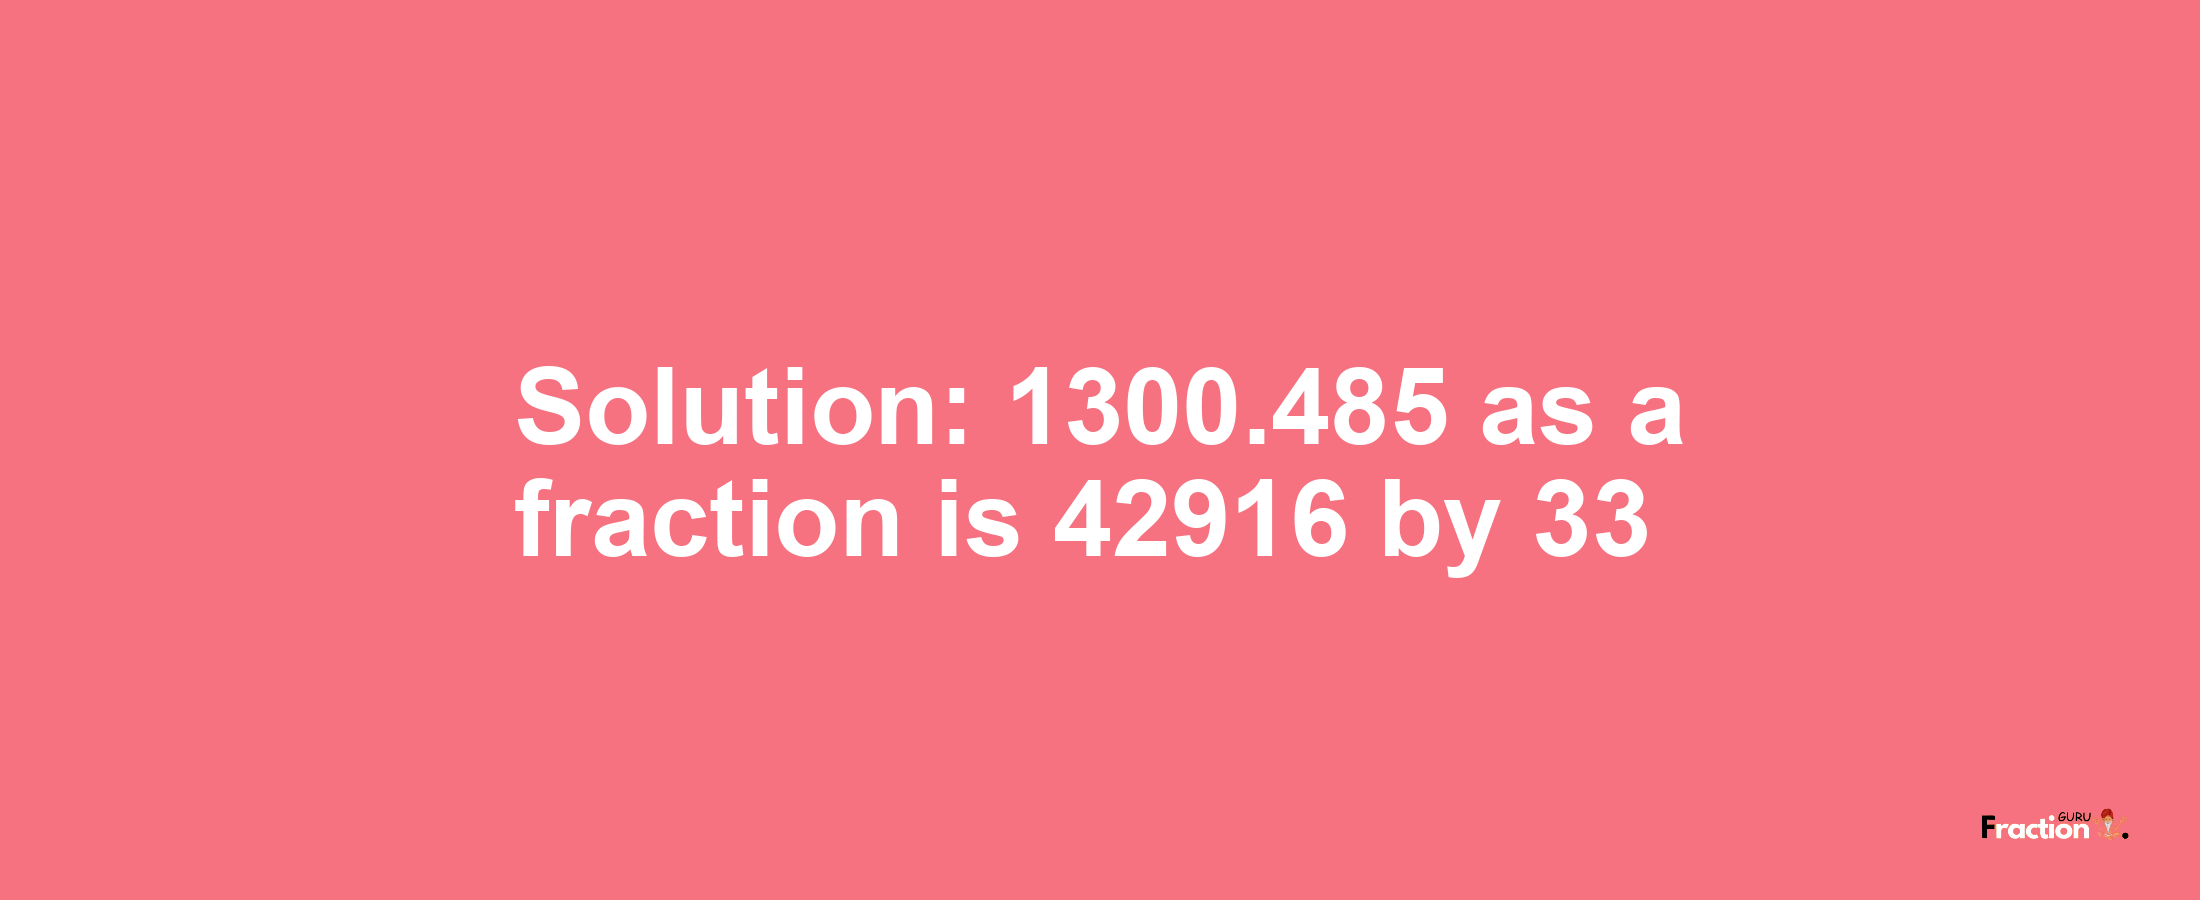 Solution:1300.485 as a fraction is 42916/33